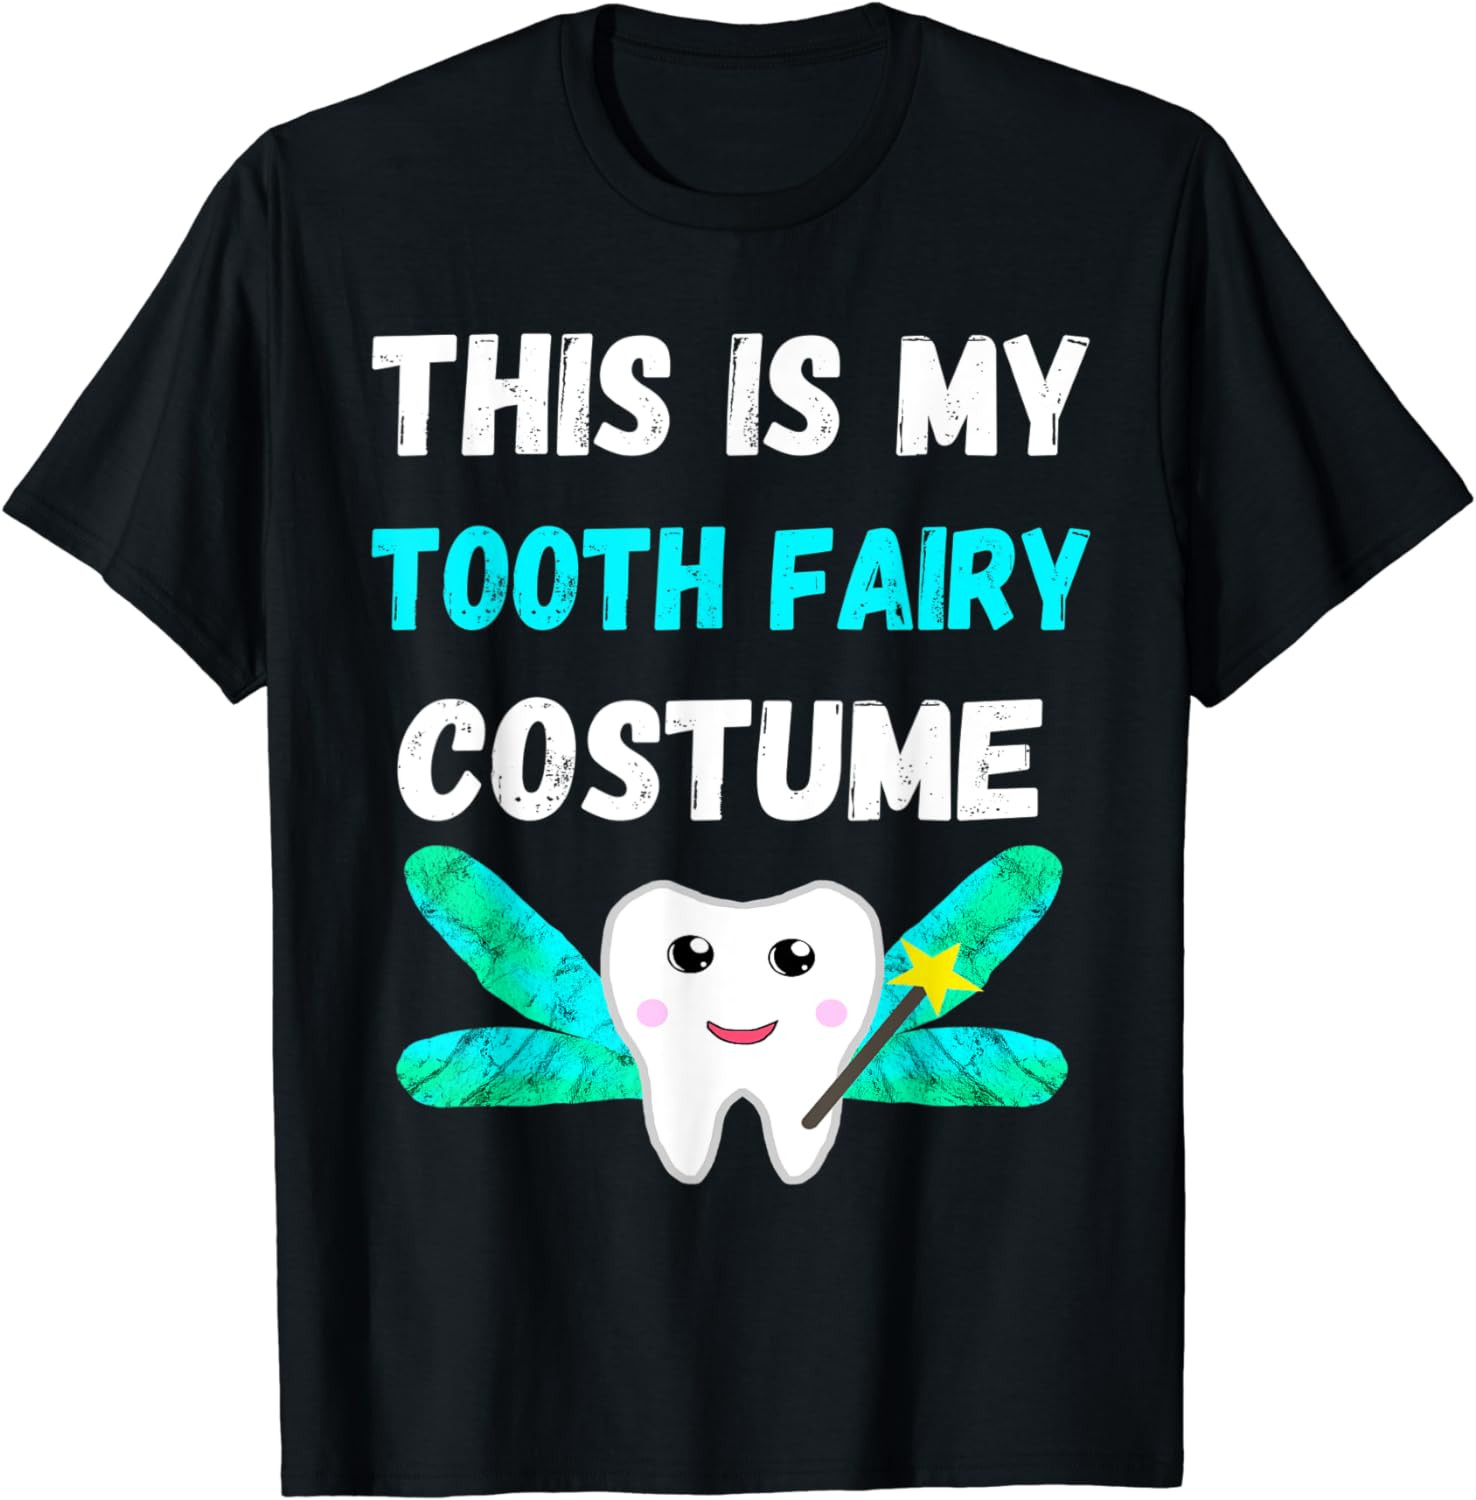 This Is My Tooth Fairy Costume Dental Hygienist Oral Hygiene T-Shirt